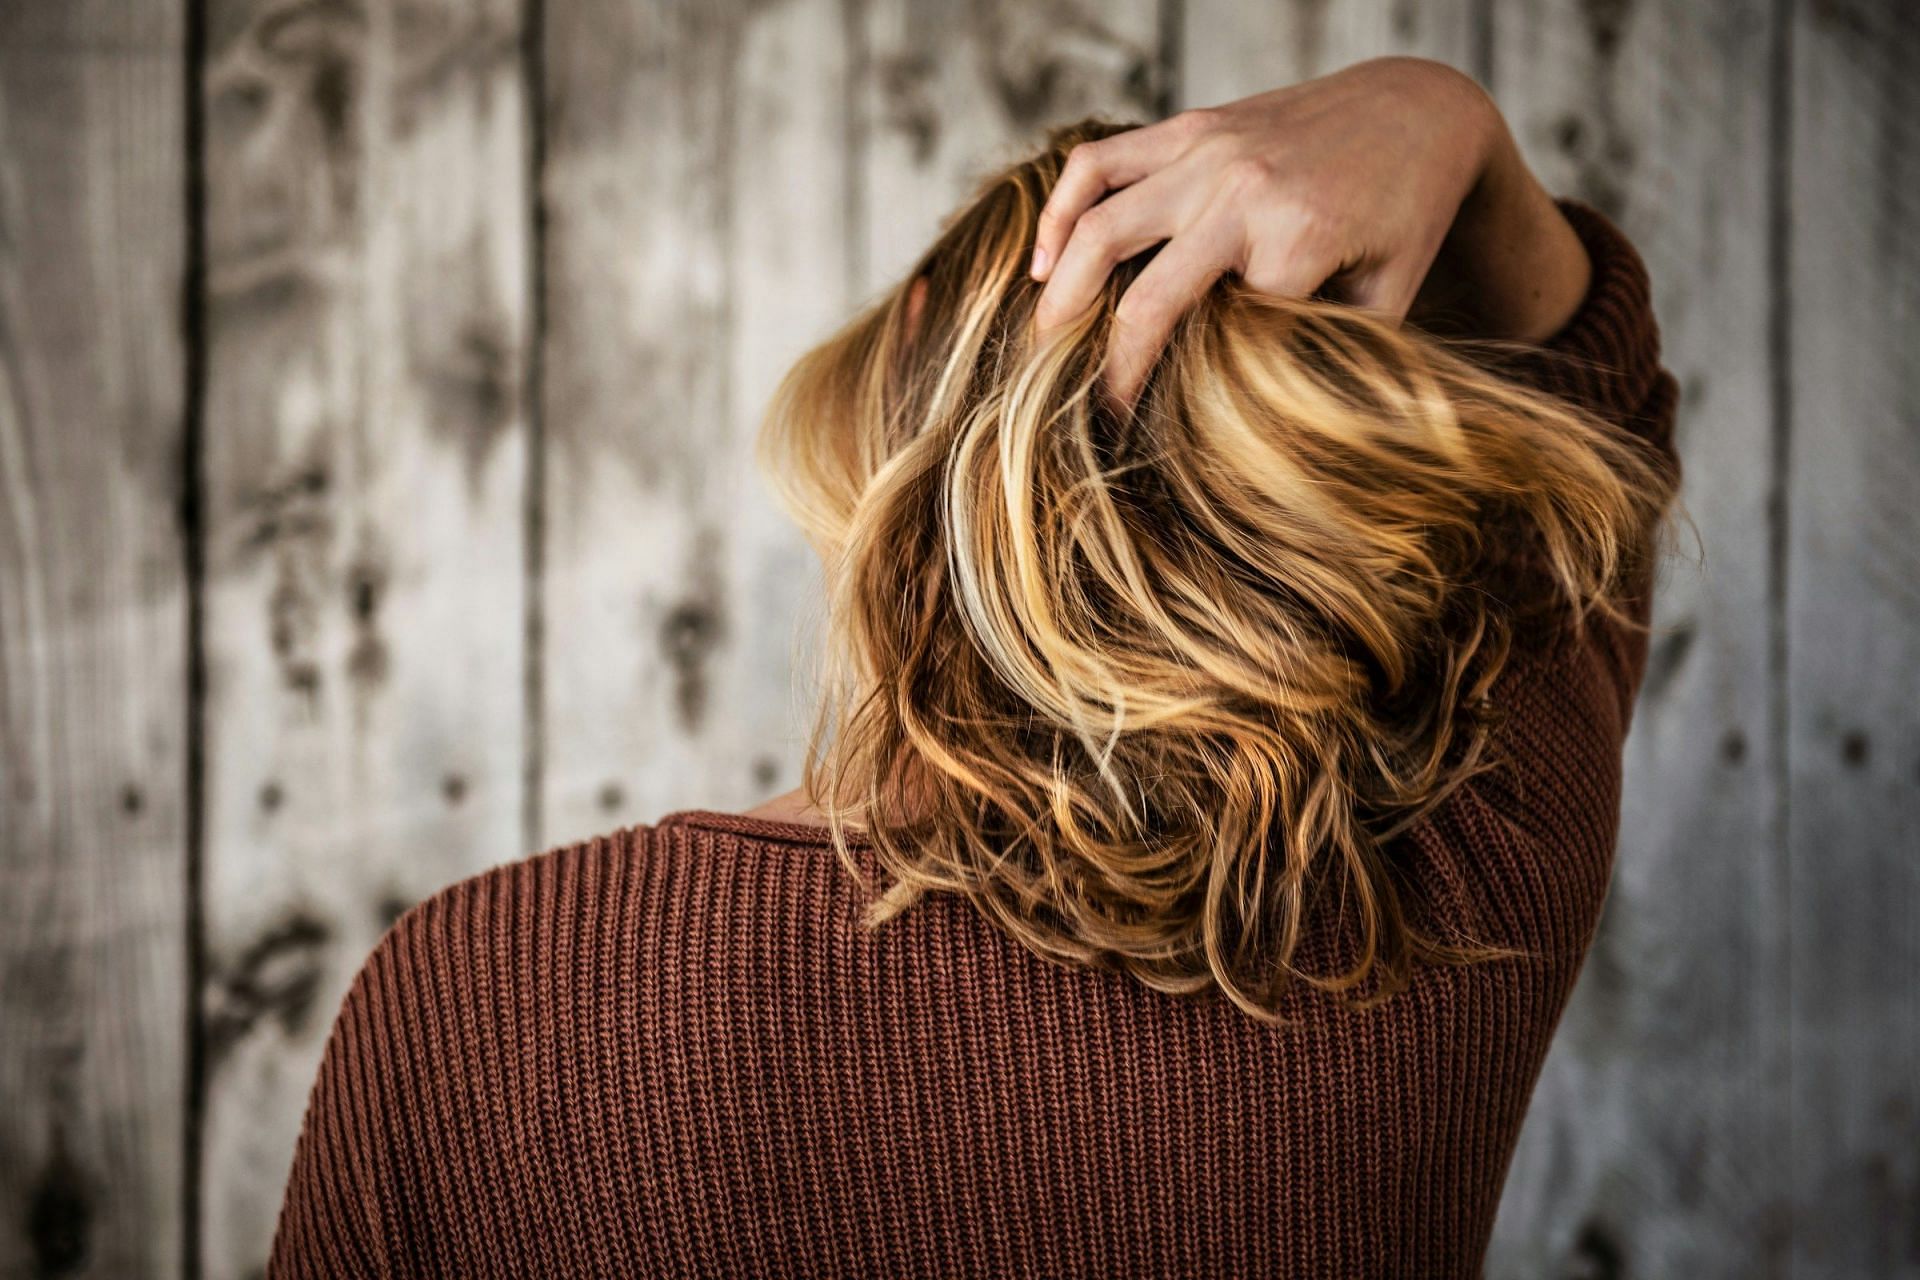 How to remove nits from hair (Image via Unsplash/Tim Mossholder)